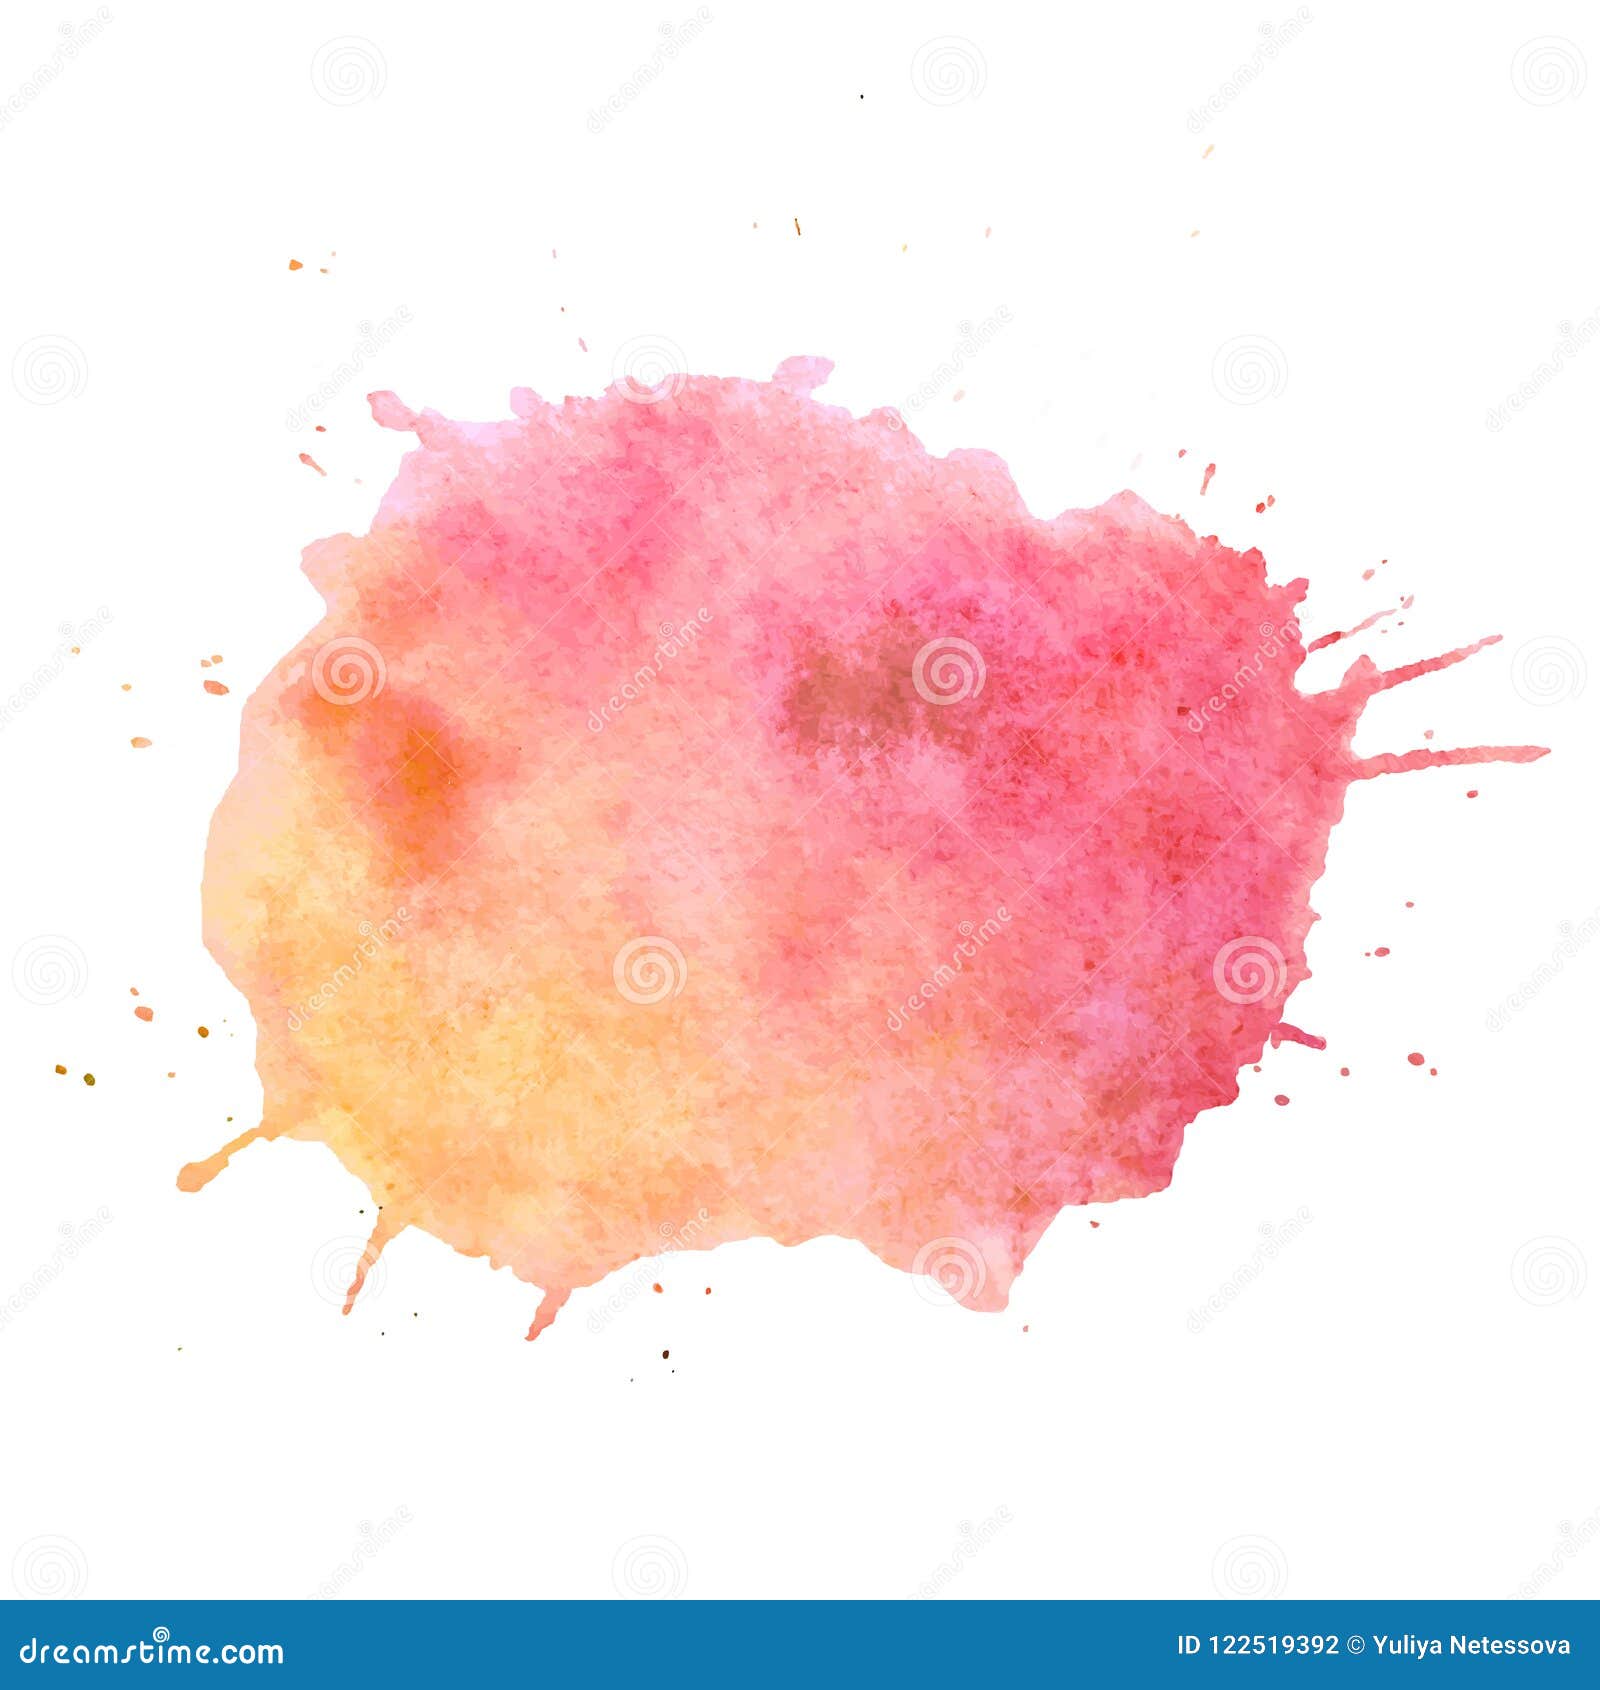 Paint box Vectors & Illustrations for Free Download